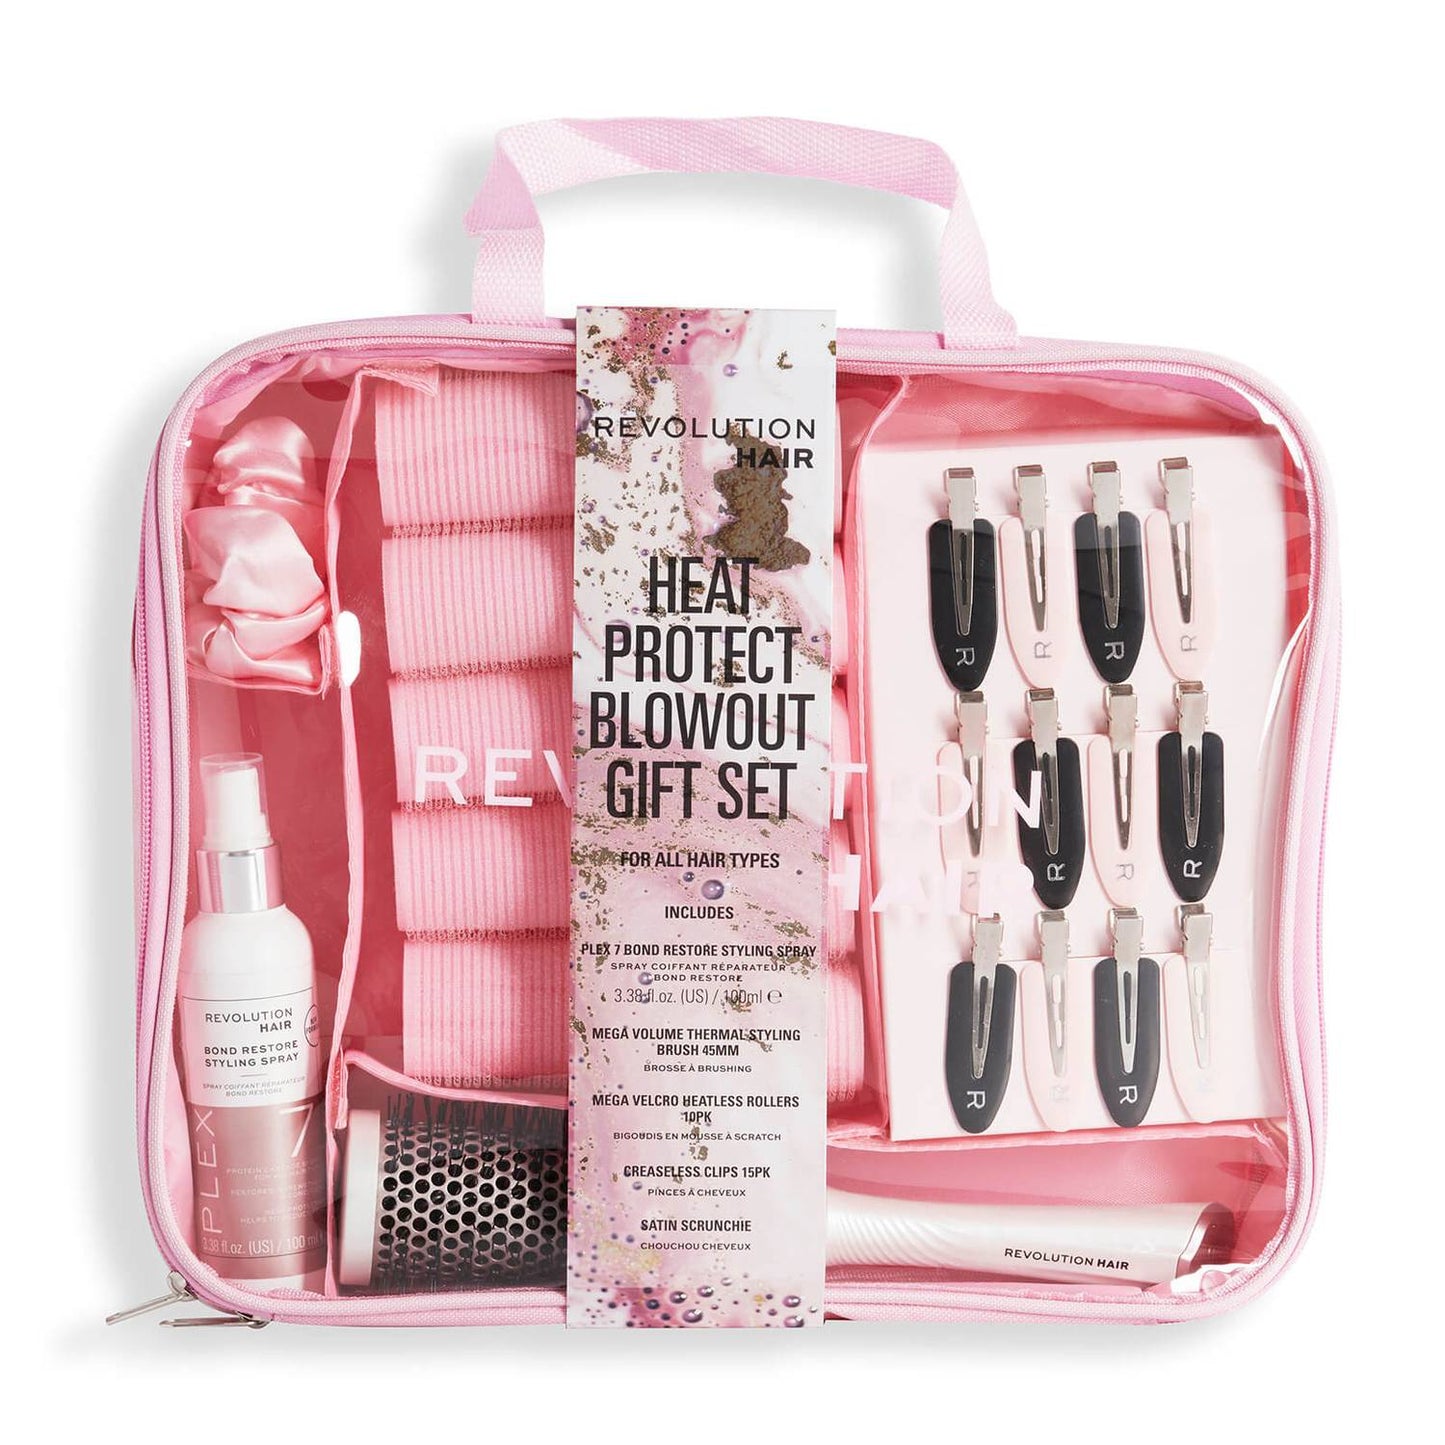 REVOLUTION HEAT PROTECT BLOW OUT GIFT SET